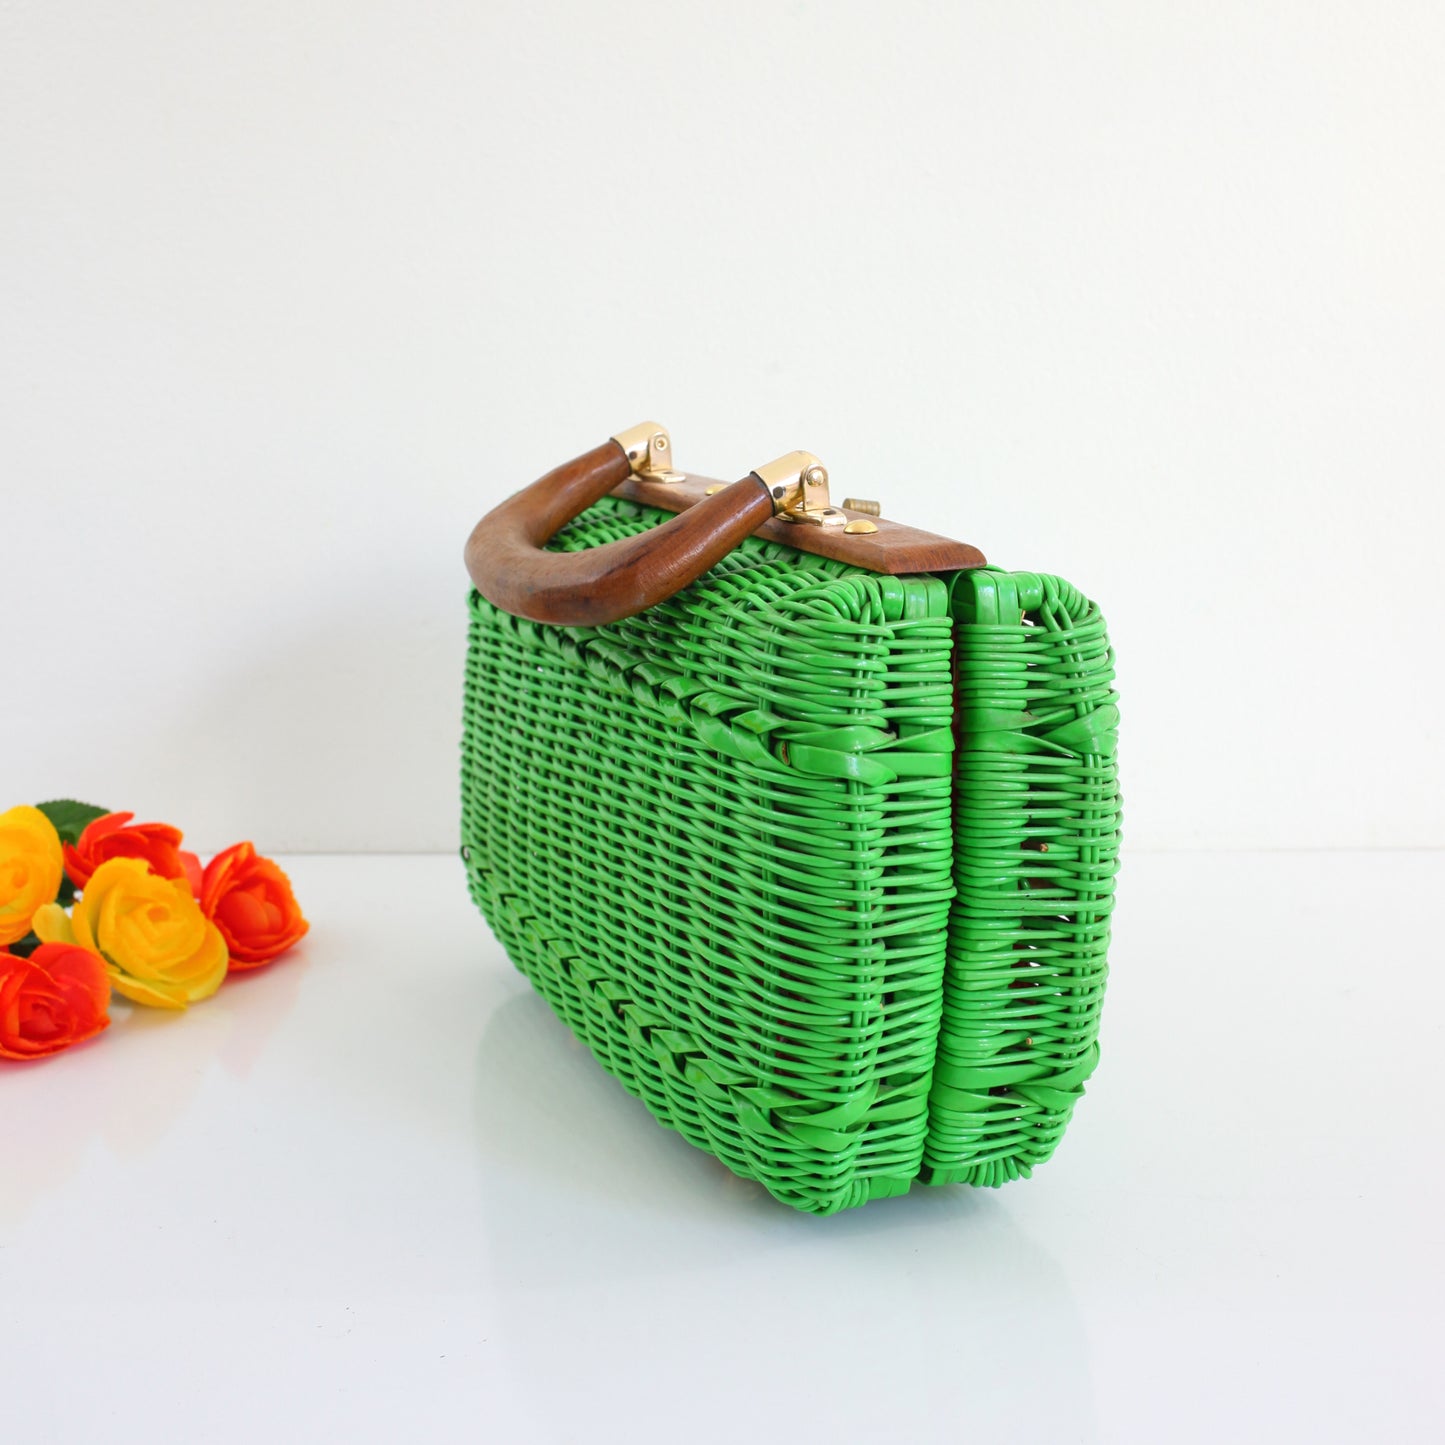 SOLD - Vintage Kelly Green Woven Plastic Purse from Hong Kong